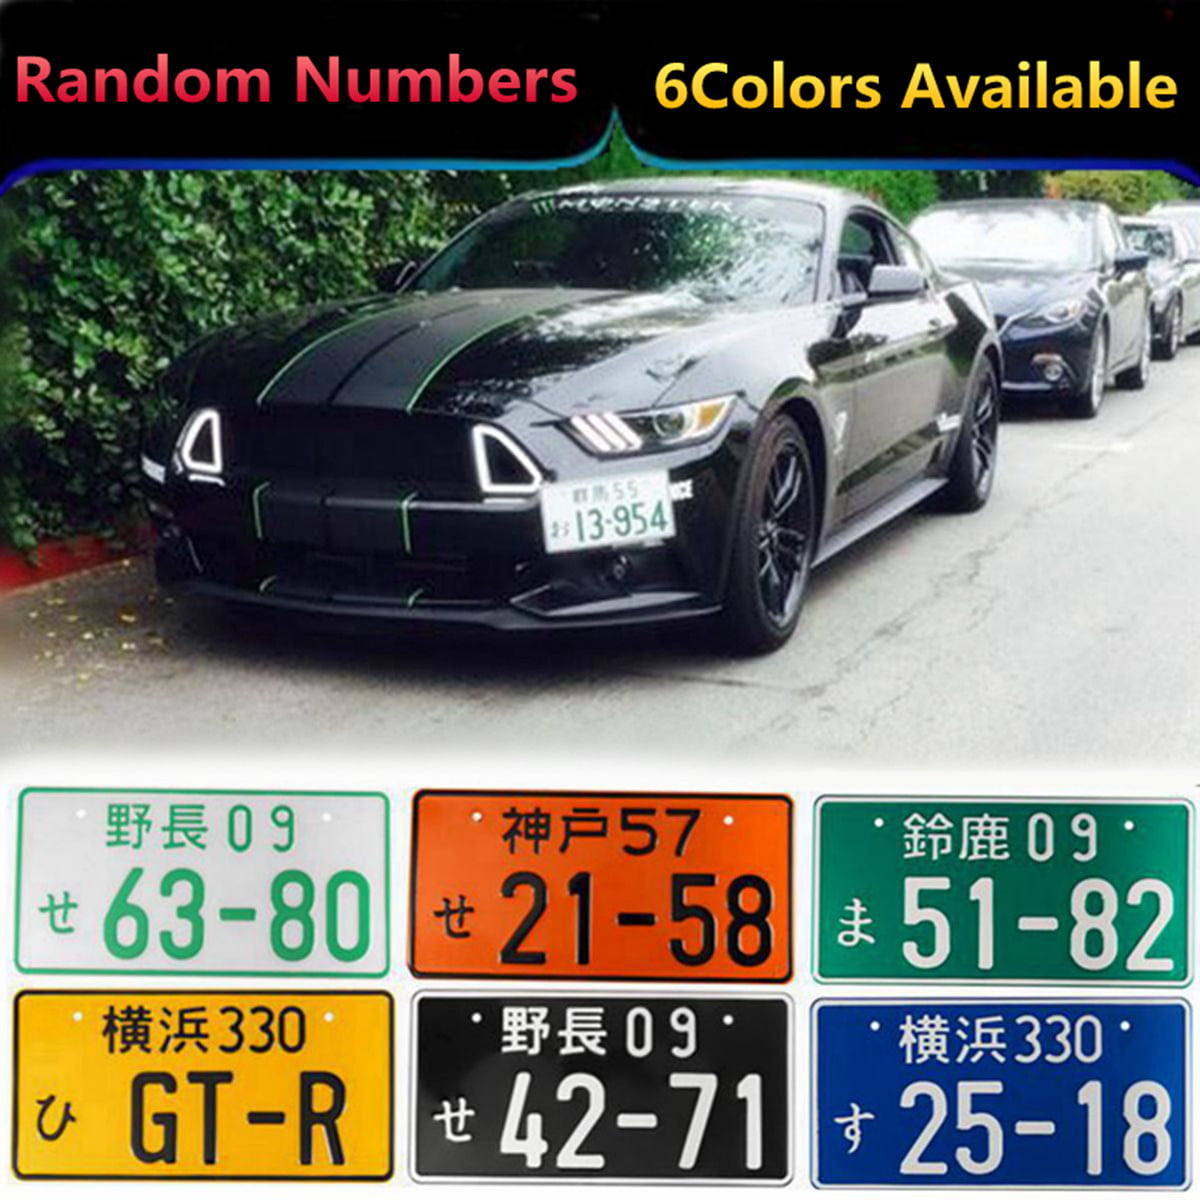 Yellow JenNiFer Universal Multiple Color Car Numbers Japanese Decorations License Plate Aluminum Tag For Jdm Kdm Racing Car Motorcycle